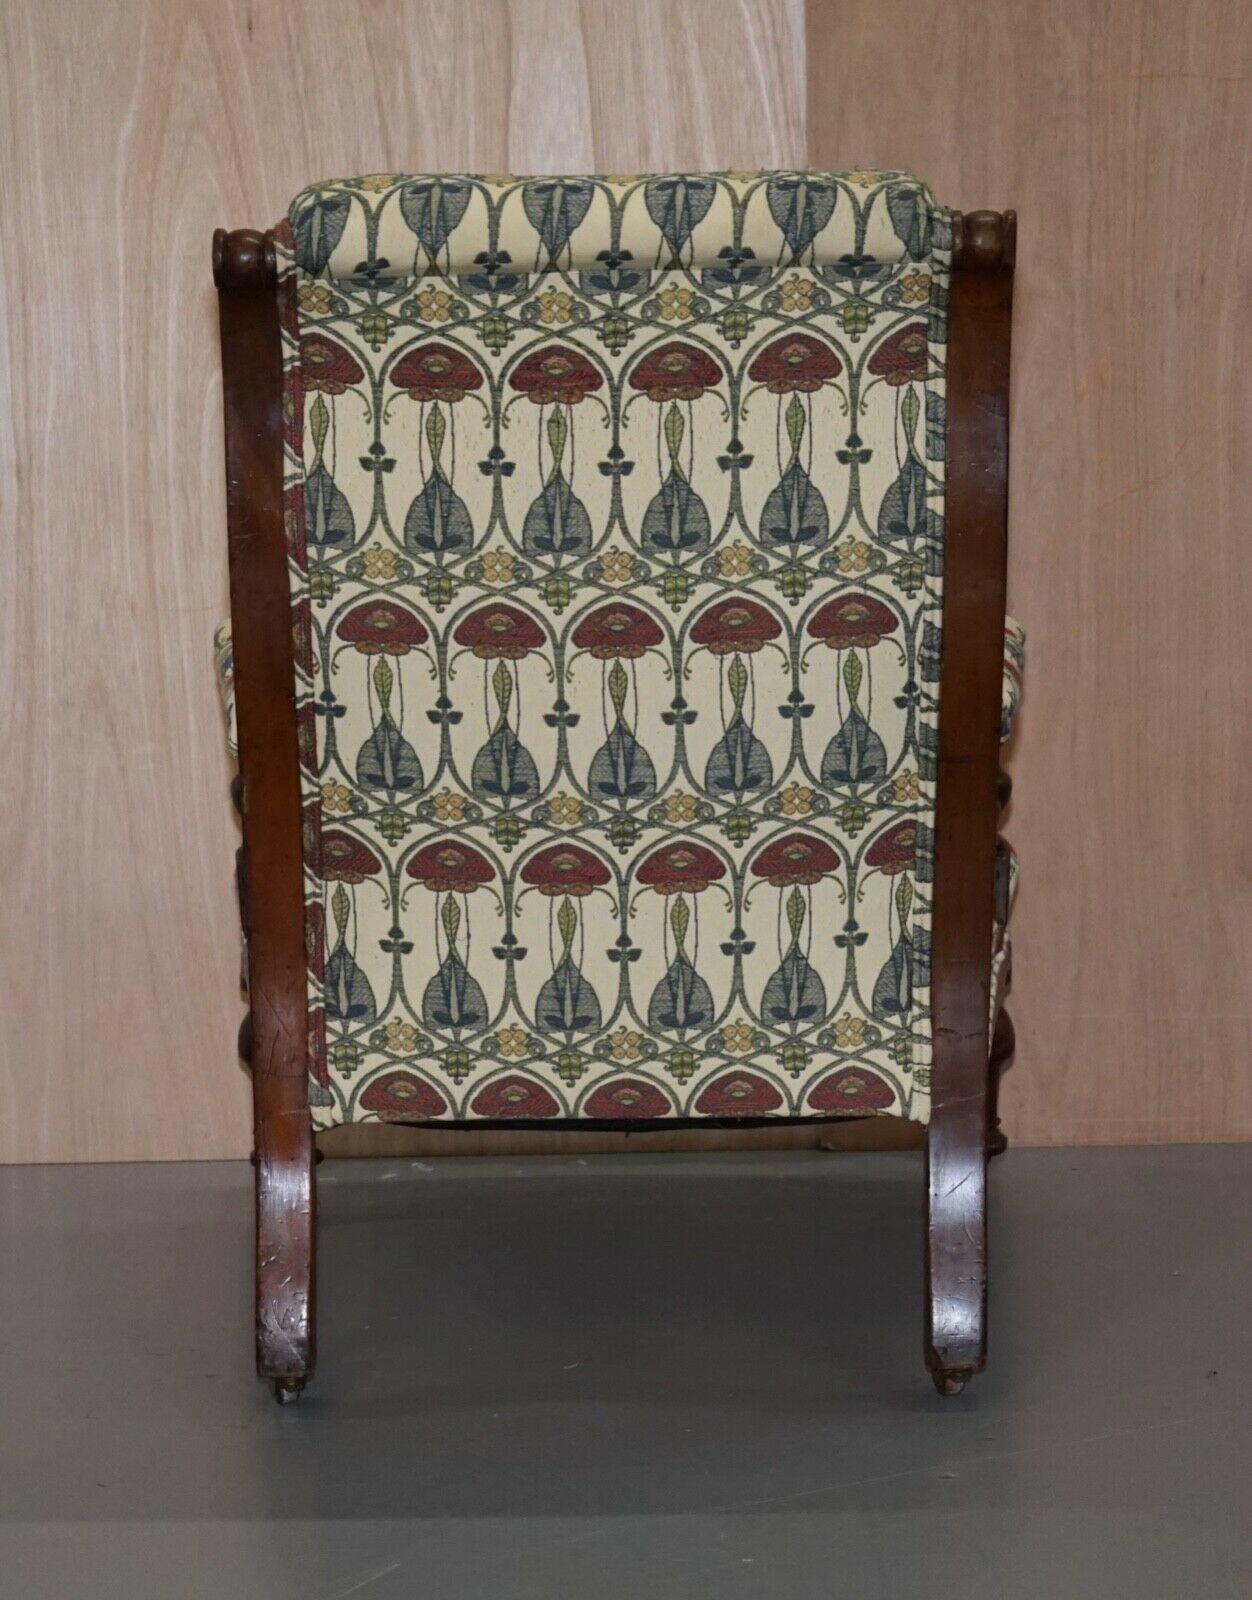 Hand-Crafted RT Deco Berger Armchair Art Nouveau Upholstery by Charles Rennie Mackintosh